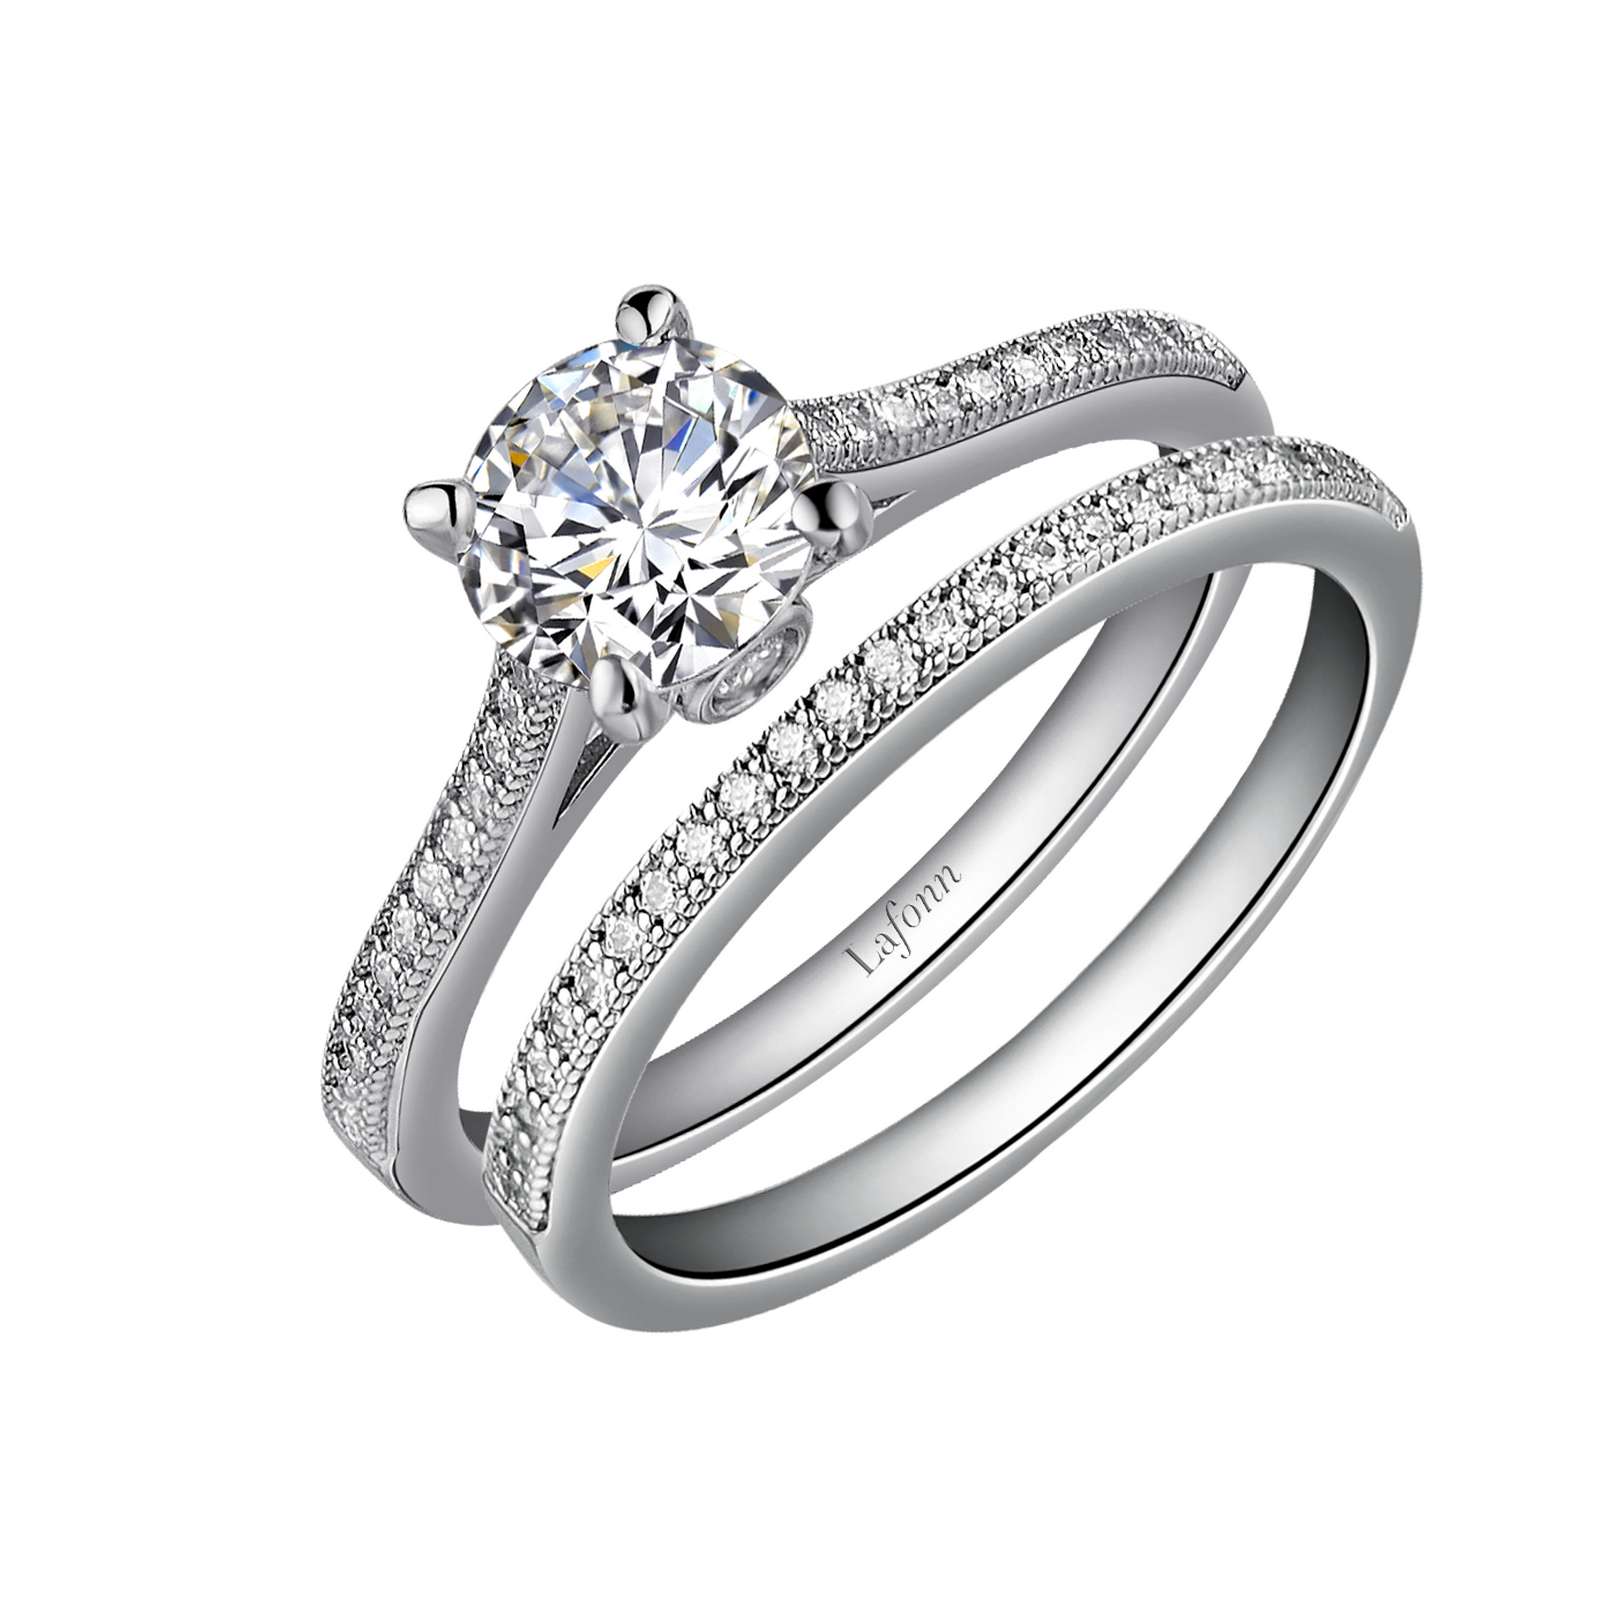 Solitaire Wedding Set Griner Jewelry Co. Moultrie, GA